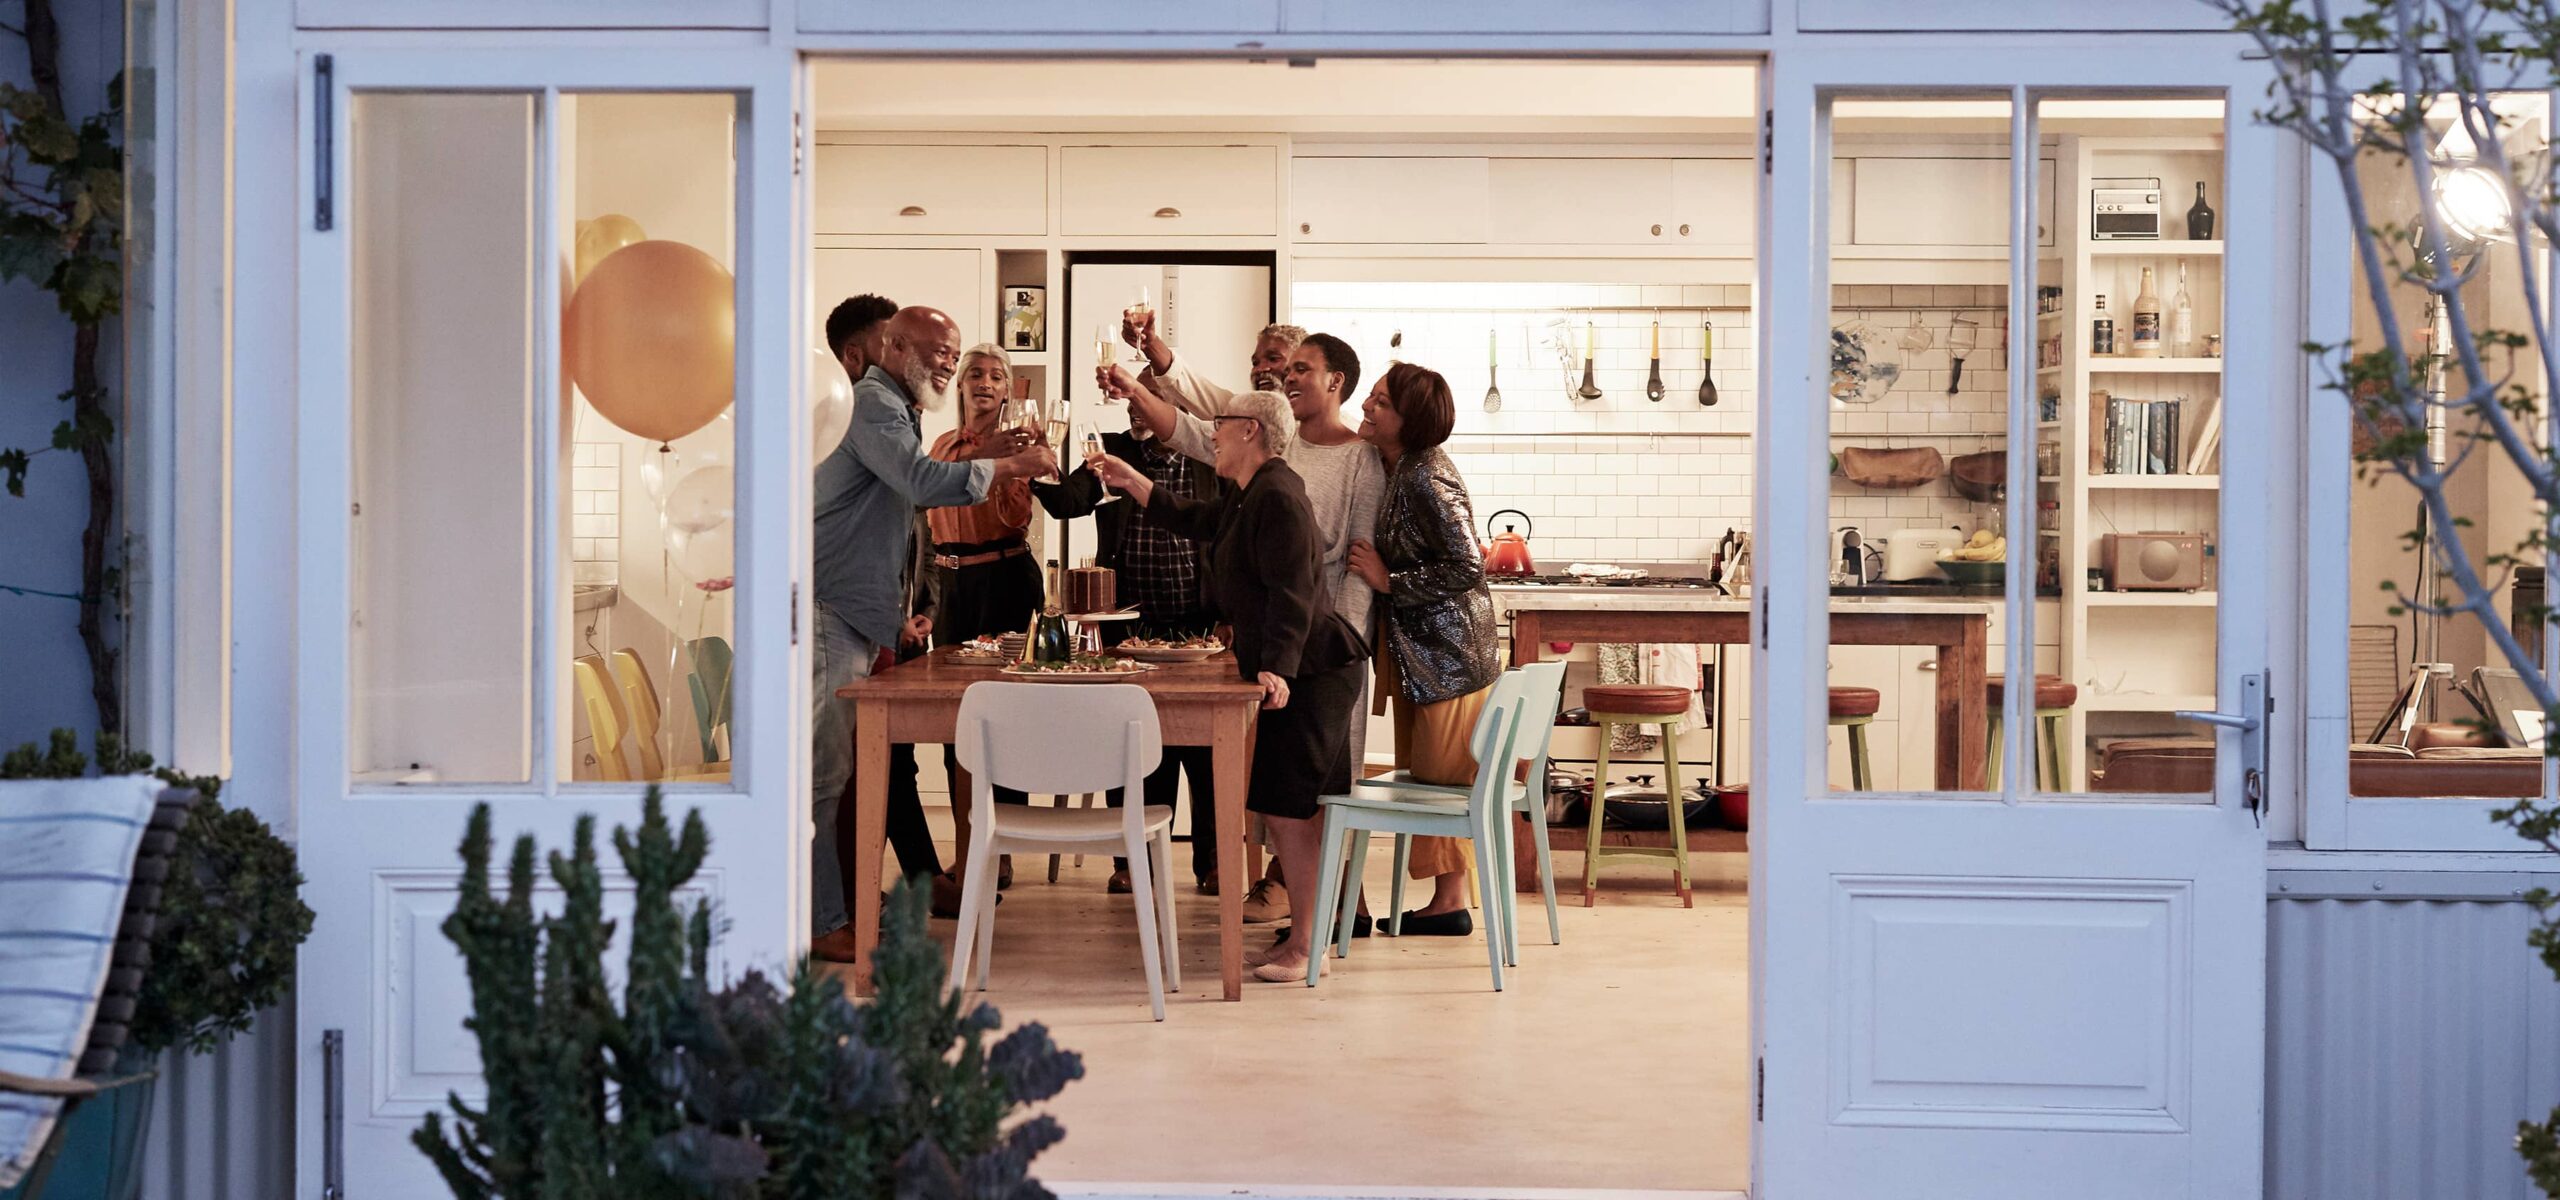 View of friends and family celebrating over dinner in a modern, warm home